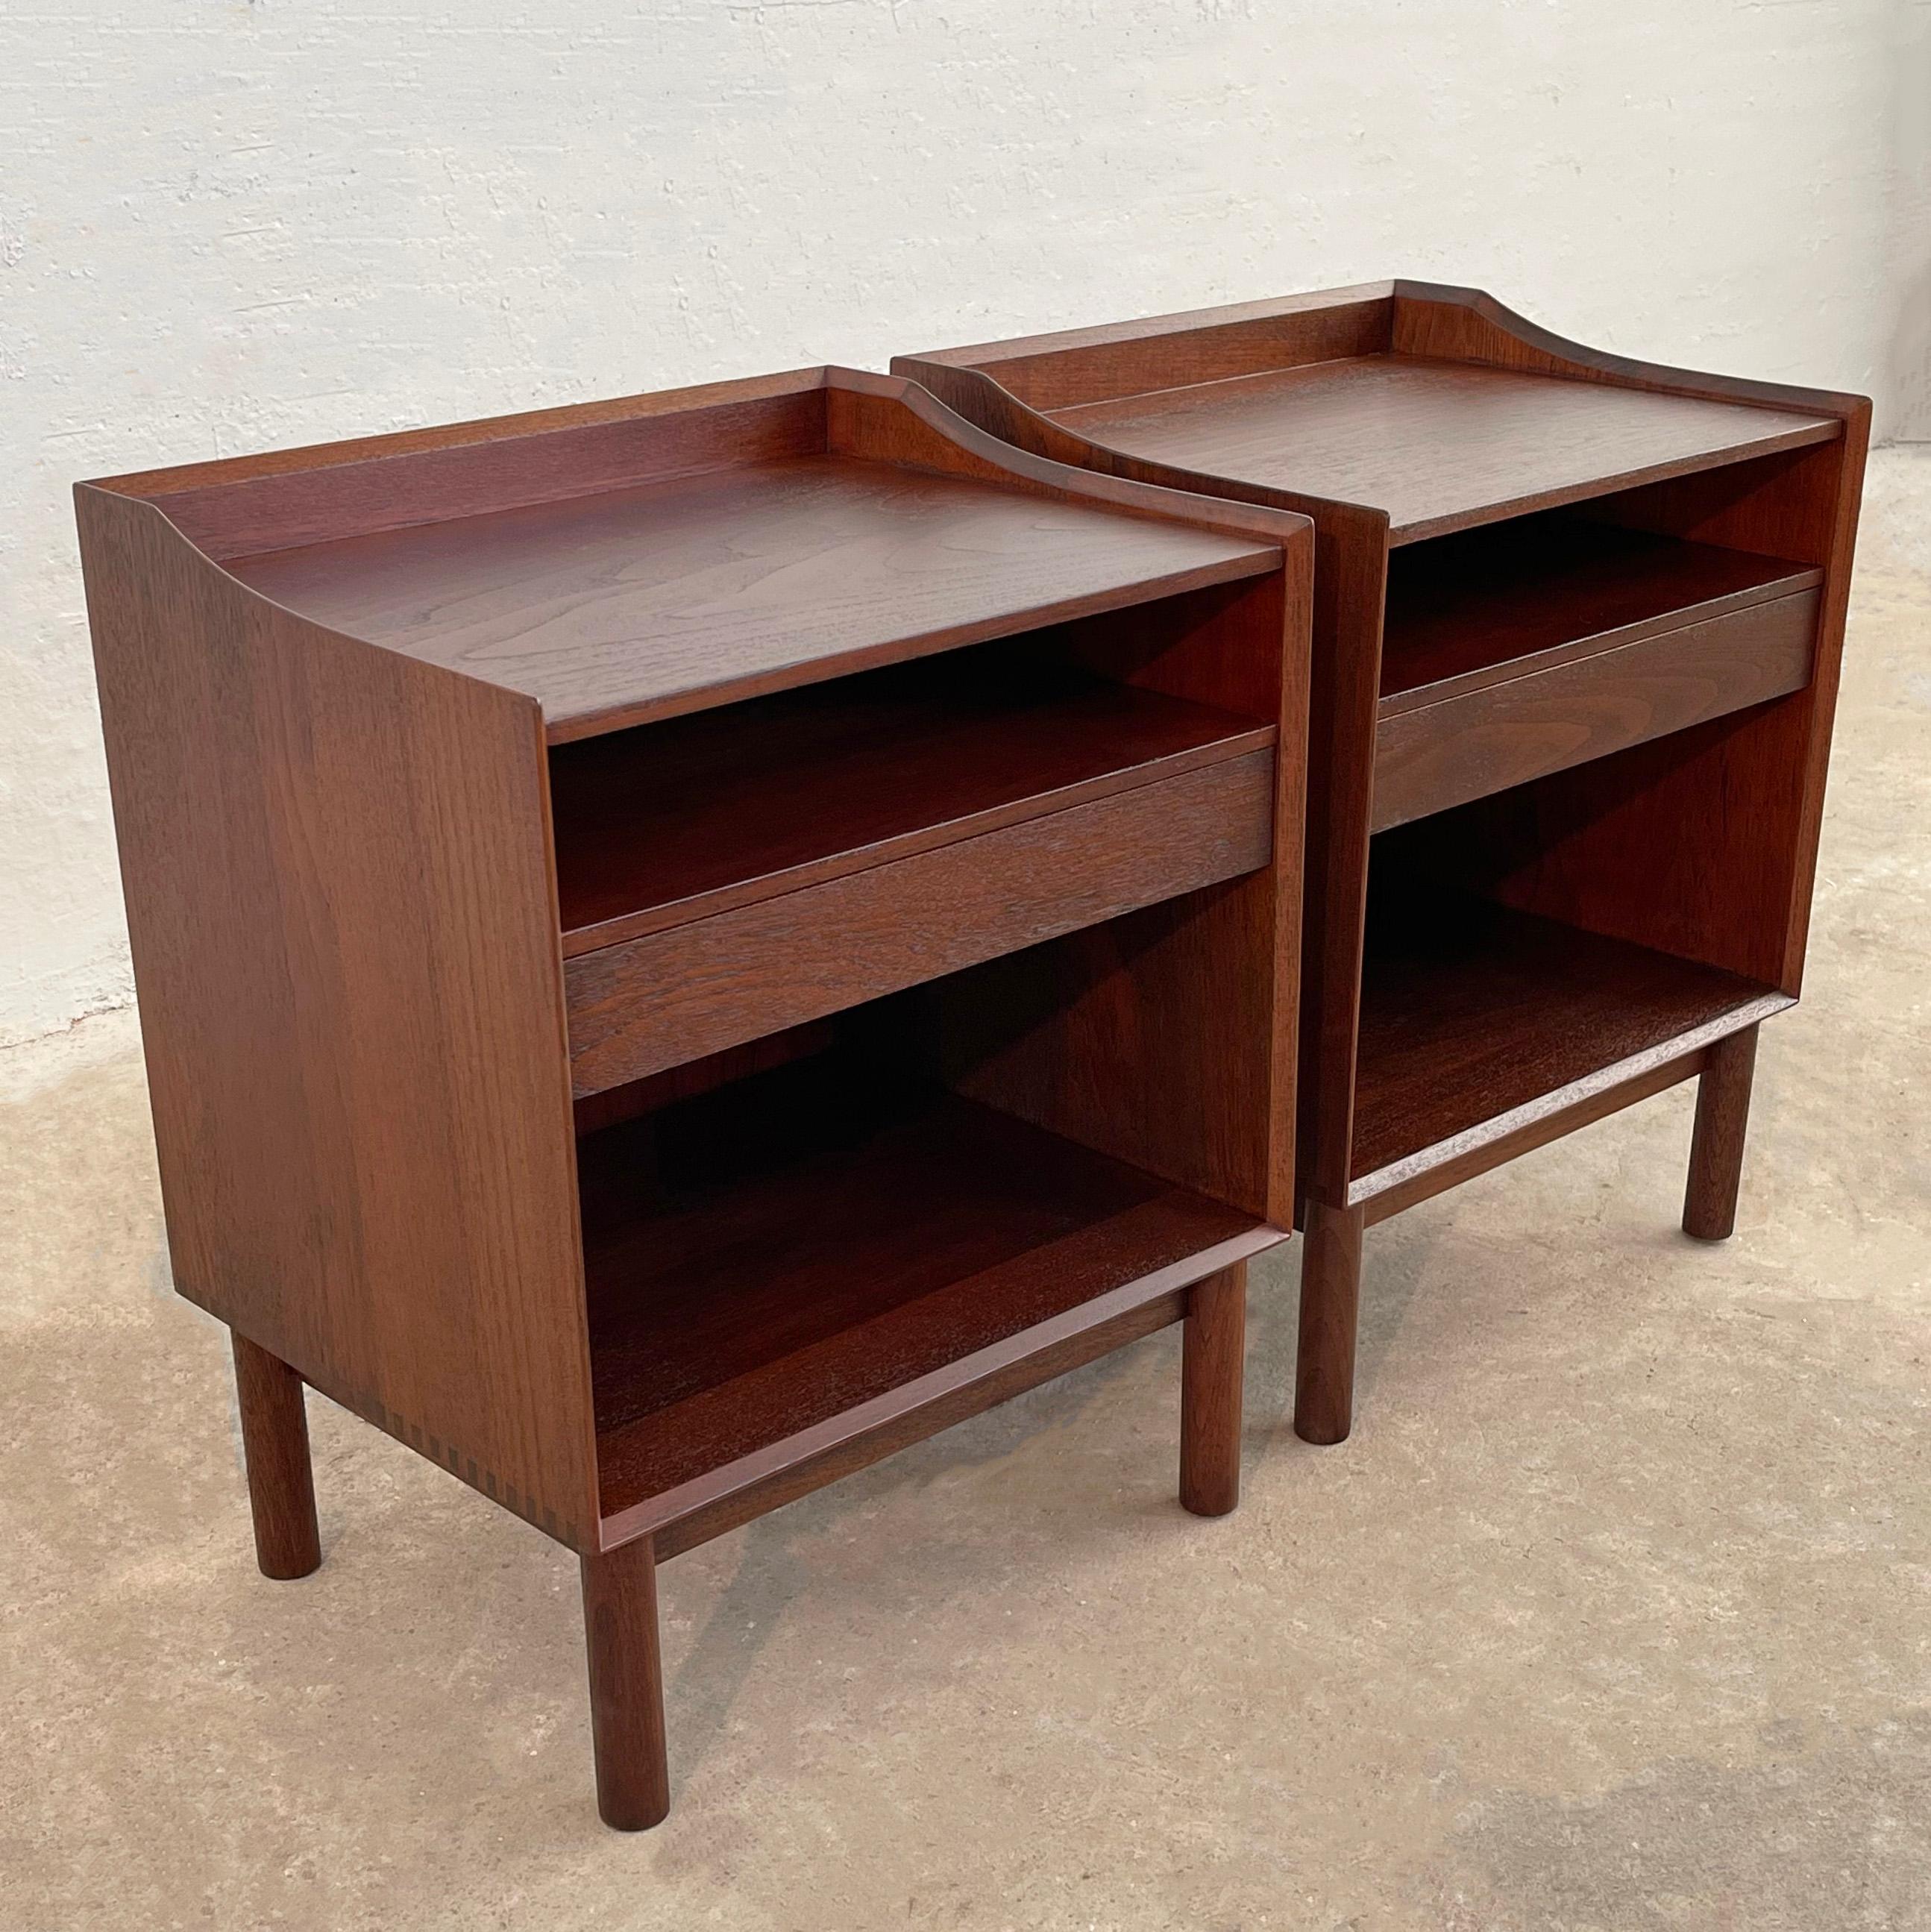 Danish Modern Teak Nighstands By Peter Hvidt And Orla Molgaard-Nielsen In Good Condition For Sale In Brooklyn, NY